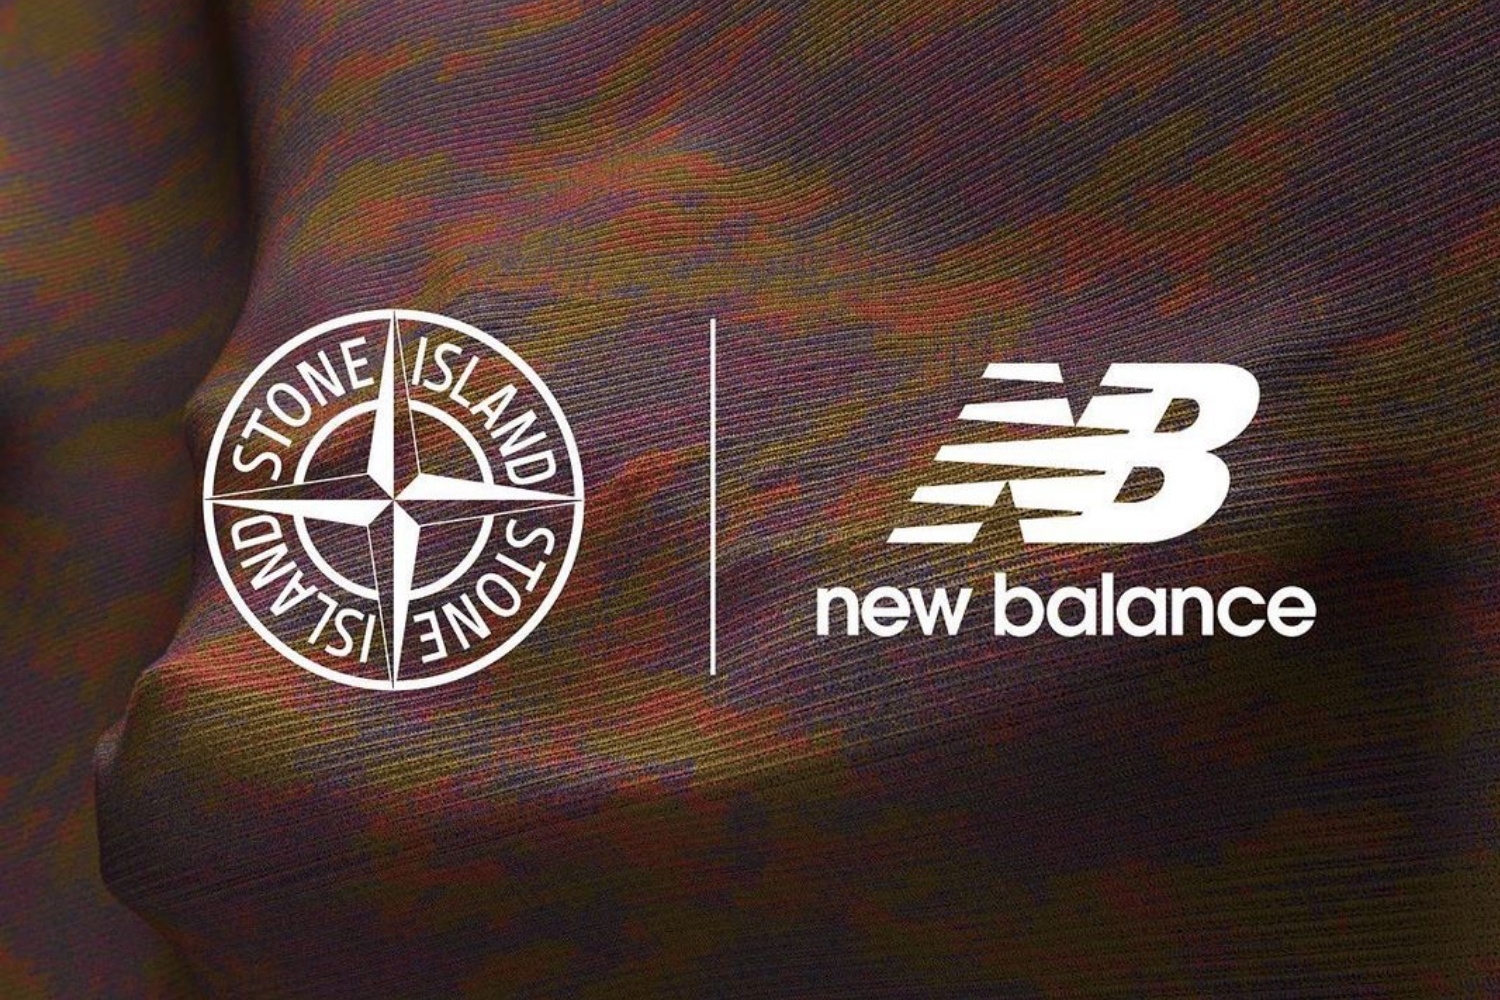 The New Balance x Stone Island FuelCell C_1 has a release date